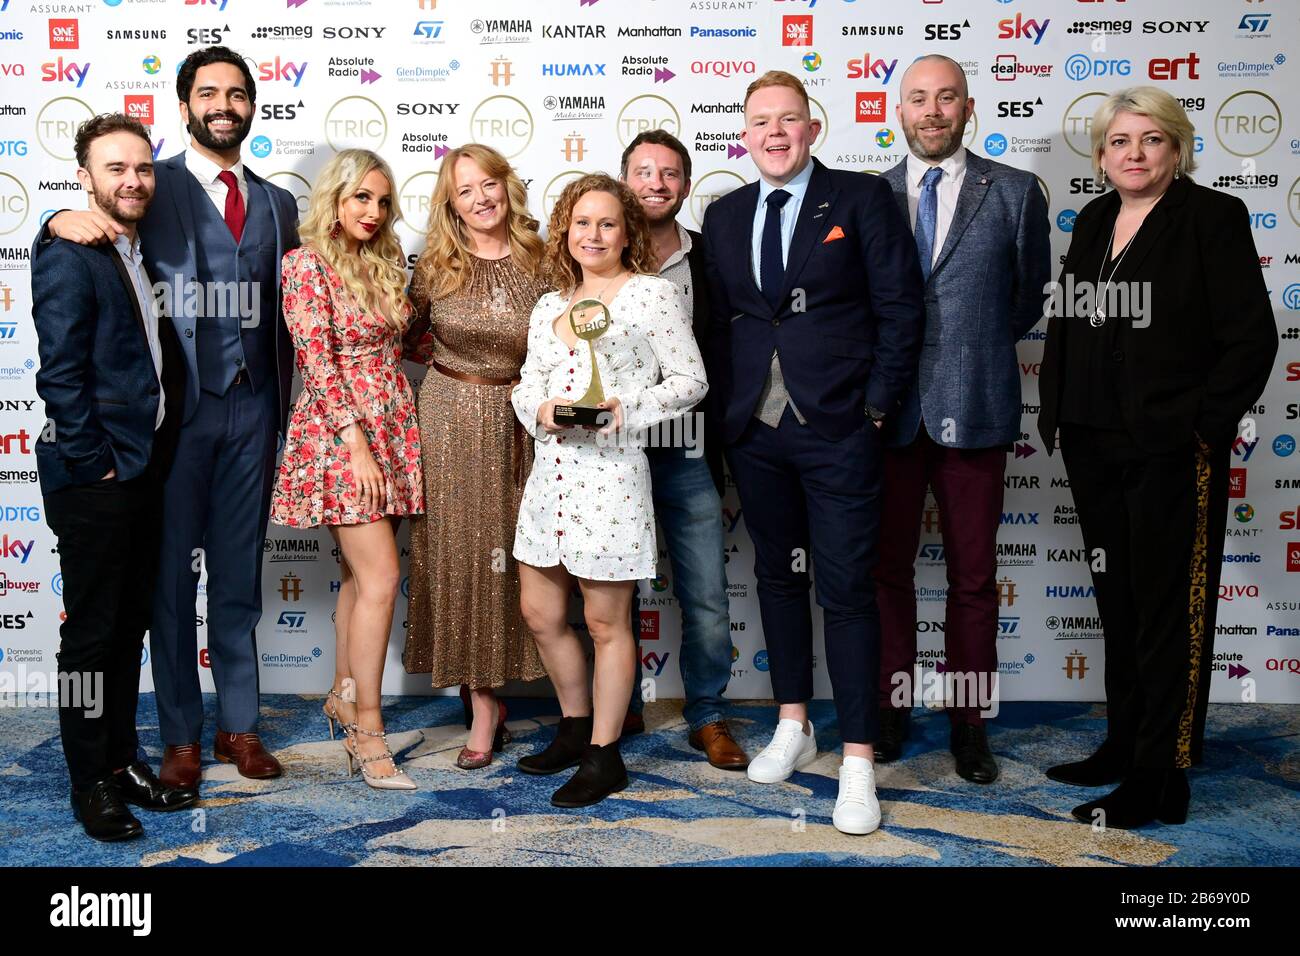 The cast of Coronation Street with the award for Soap of the Year Sponsored by Assurant. Jack P. Shepherd, Charlie De Melo, Sally Ann Matthews, Dolly-Rose Campbell, Peter Ash, and Colson Smith attending the TRIC Awards 2020 held at the Grosvenor Hotel, London. Stock Photo